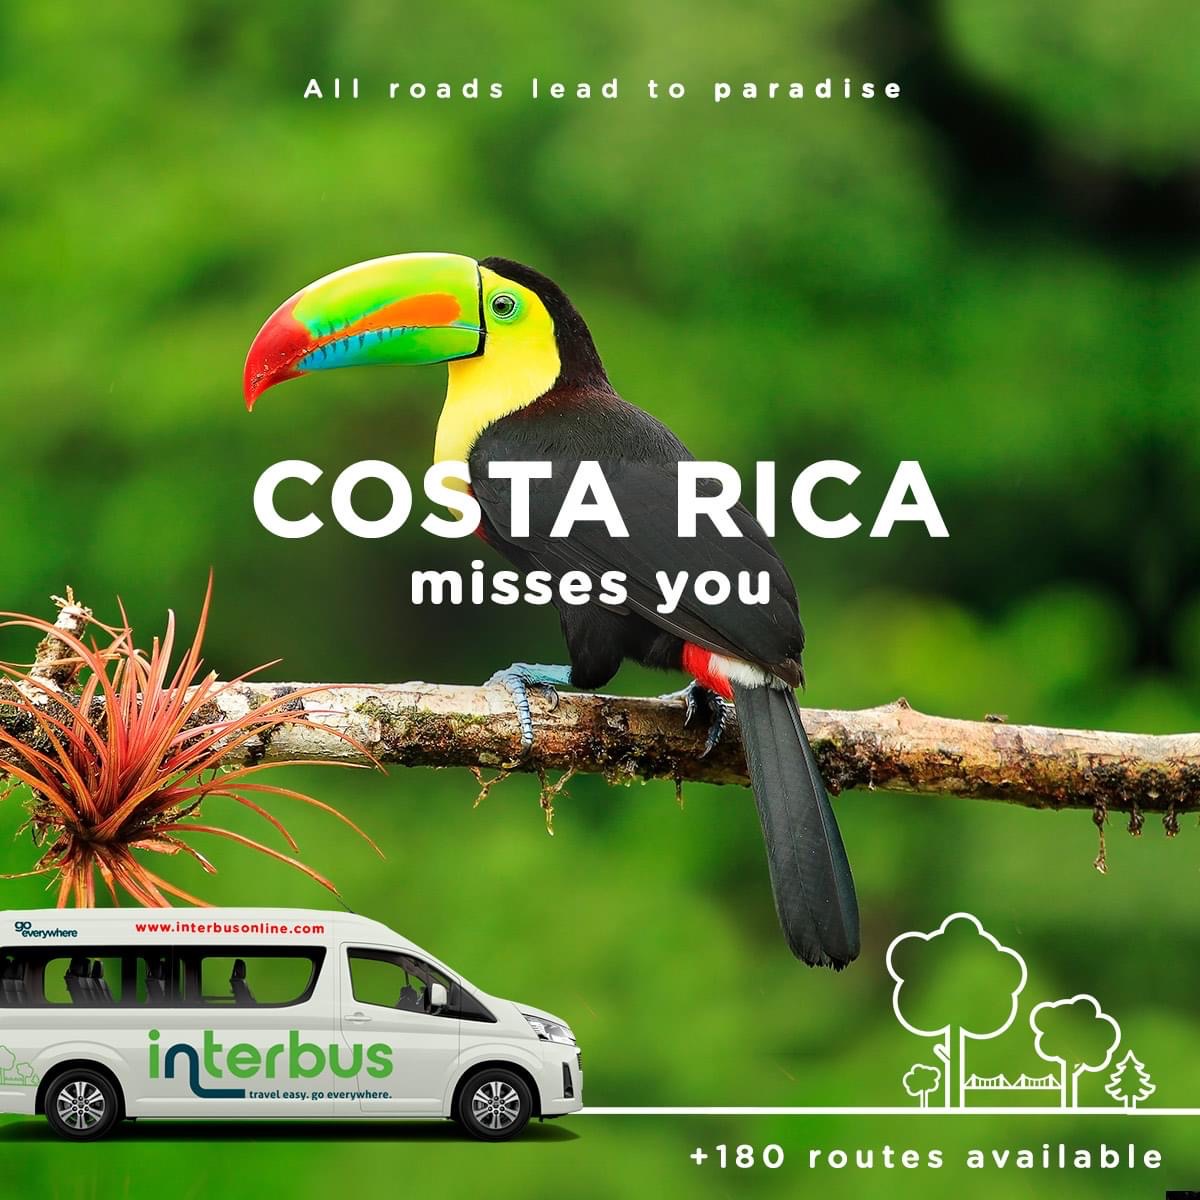 San Jose Airport to The W Costa Rica Reserva Conchal - Shuttle Transportation